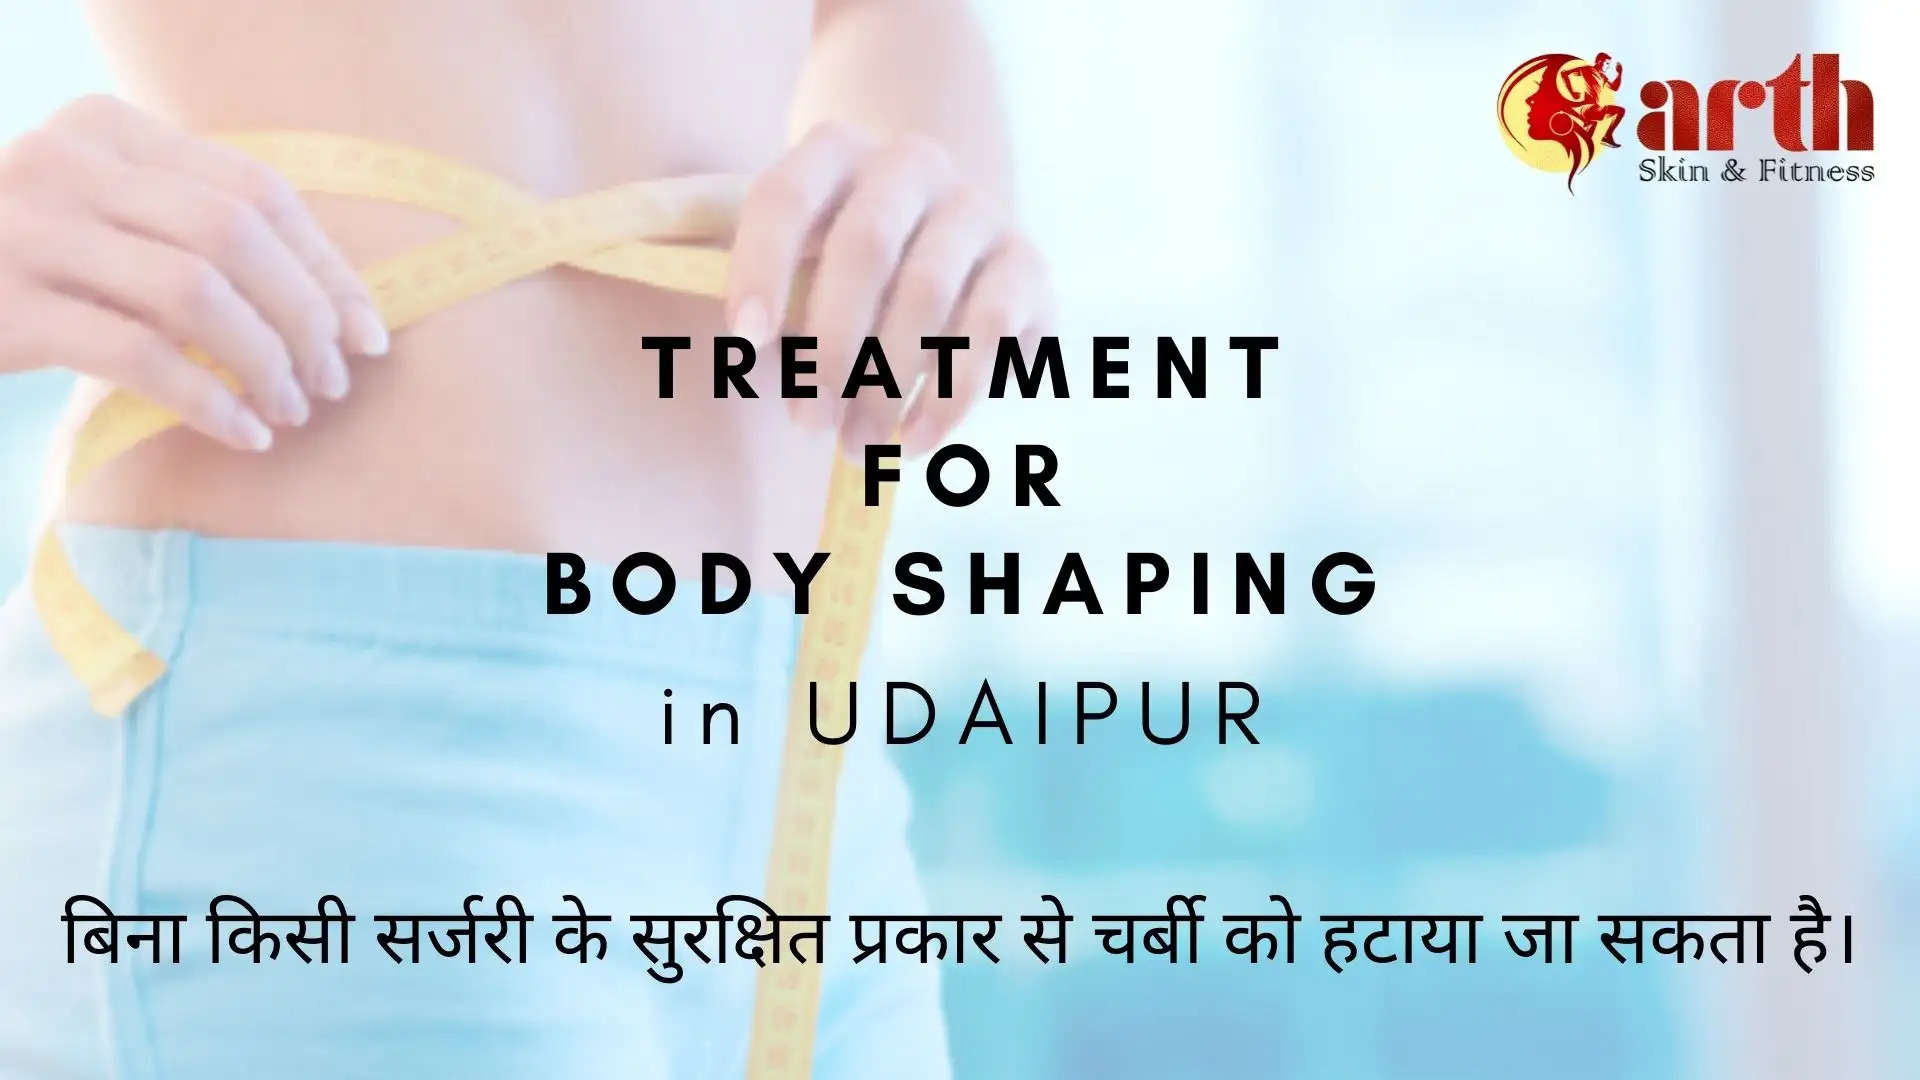 obesity treatment in udaipur, non surgical remove fat, without surgery, in udaipur first time, in rajasthan, fat removal without surgery, how to reduce fat without surgery